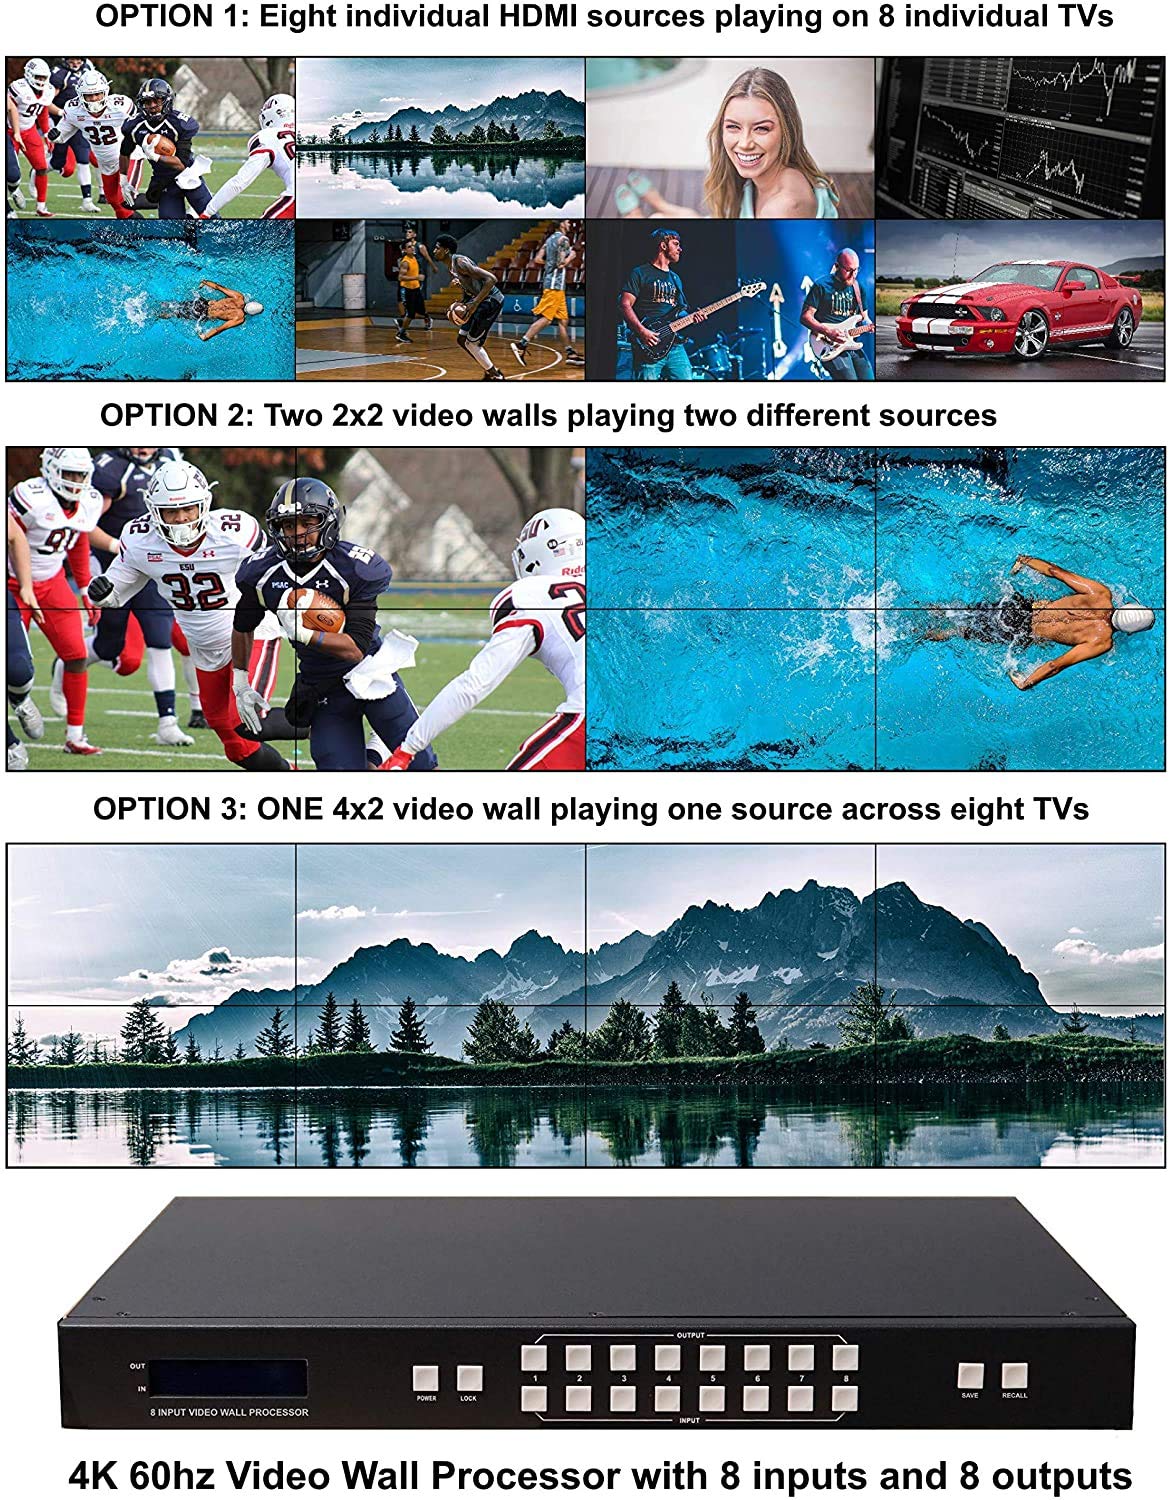 8 input 8 output - 2x4 Video Wall Processor for 8 Monitors - 4K60hz Seamless Switching